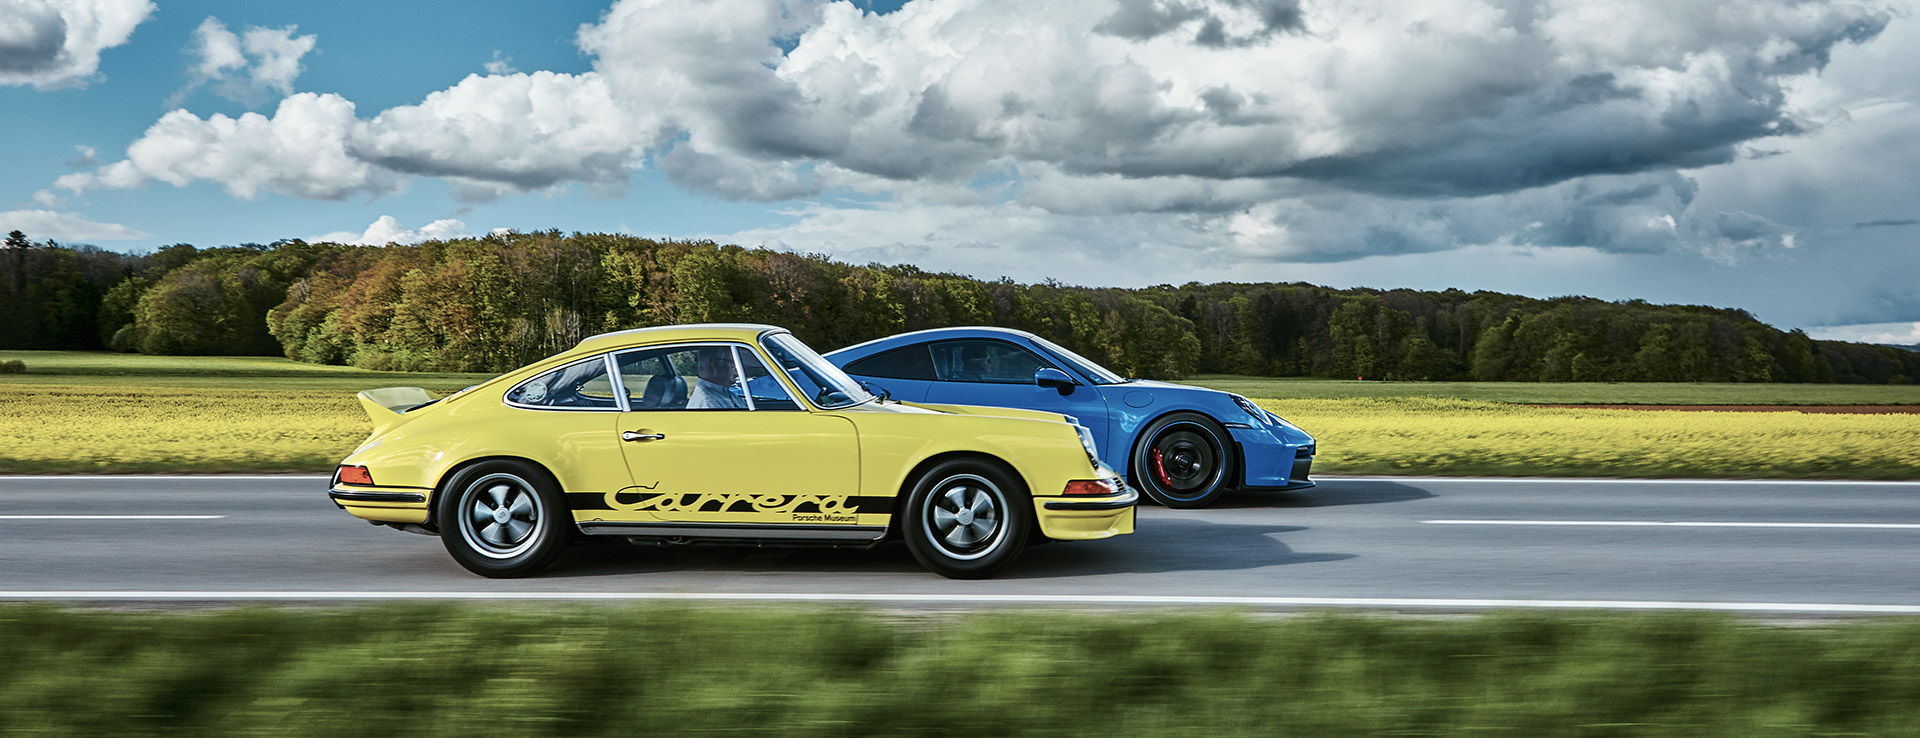 Two Porsche sportscars overtaking in front of yellow fields